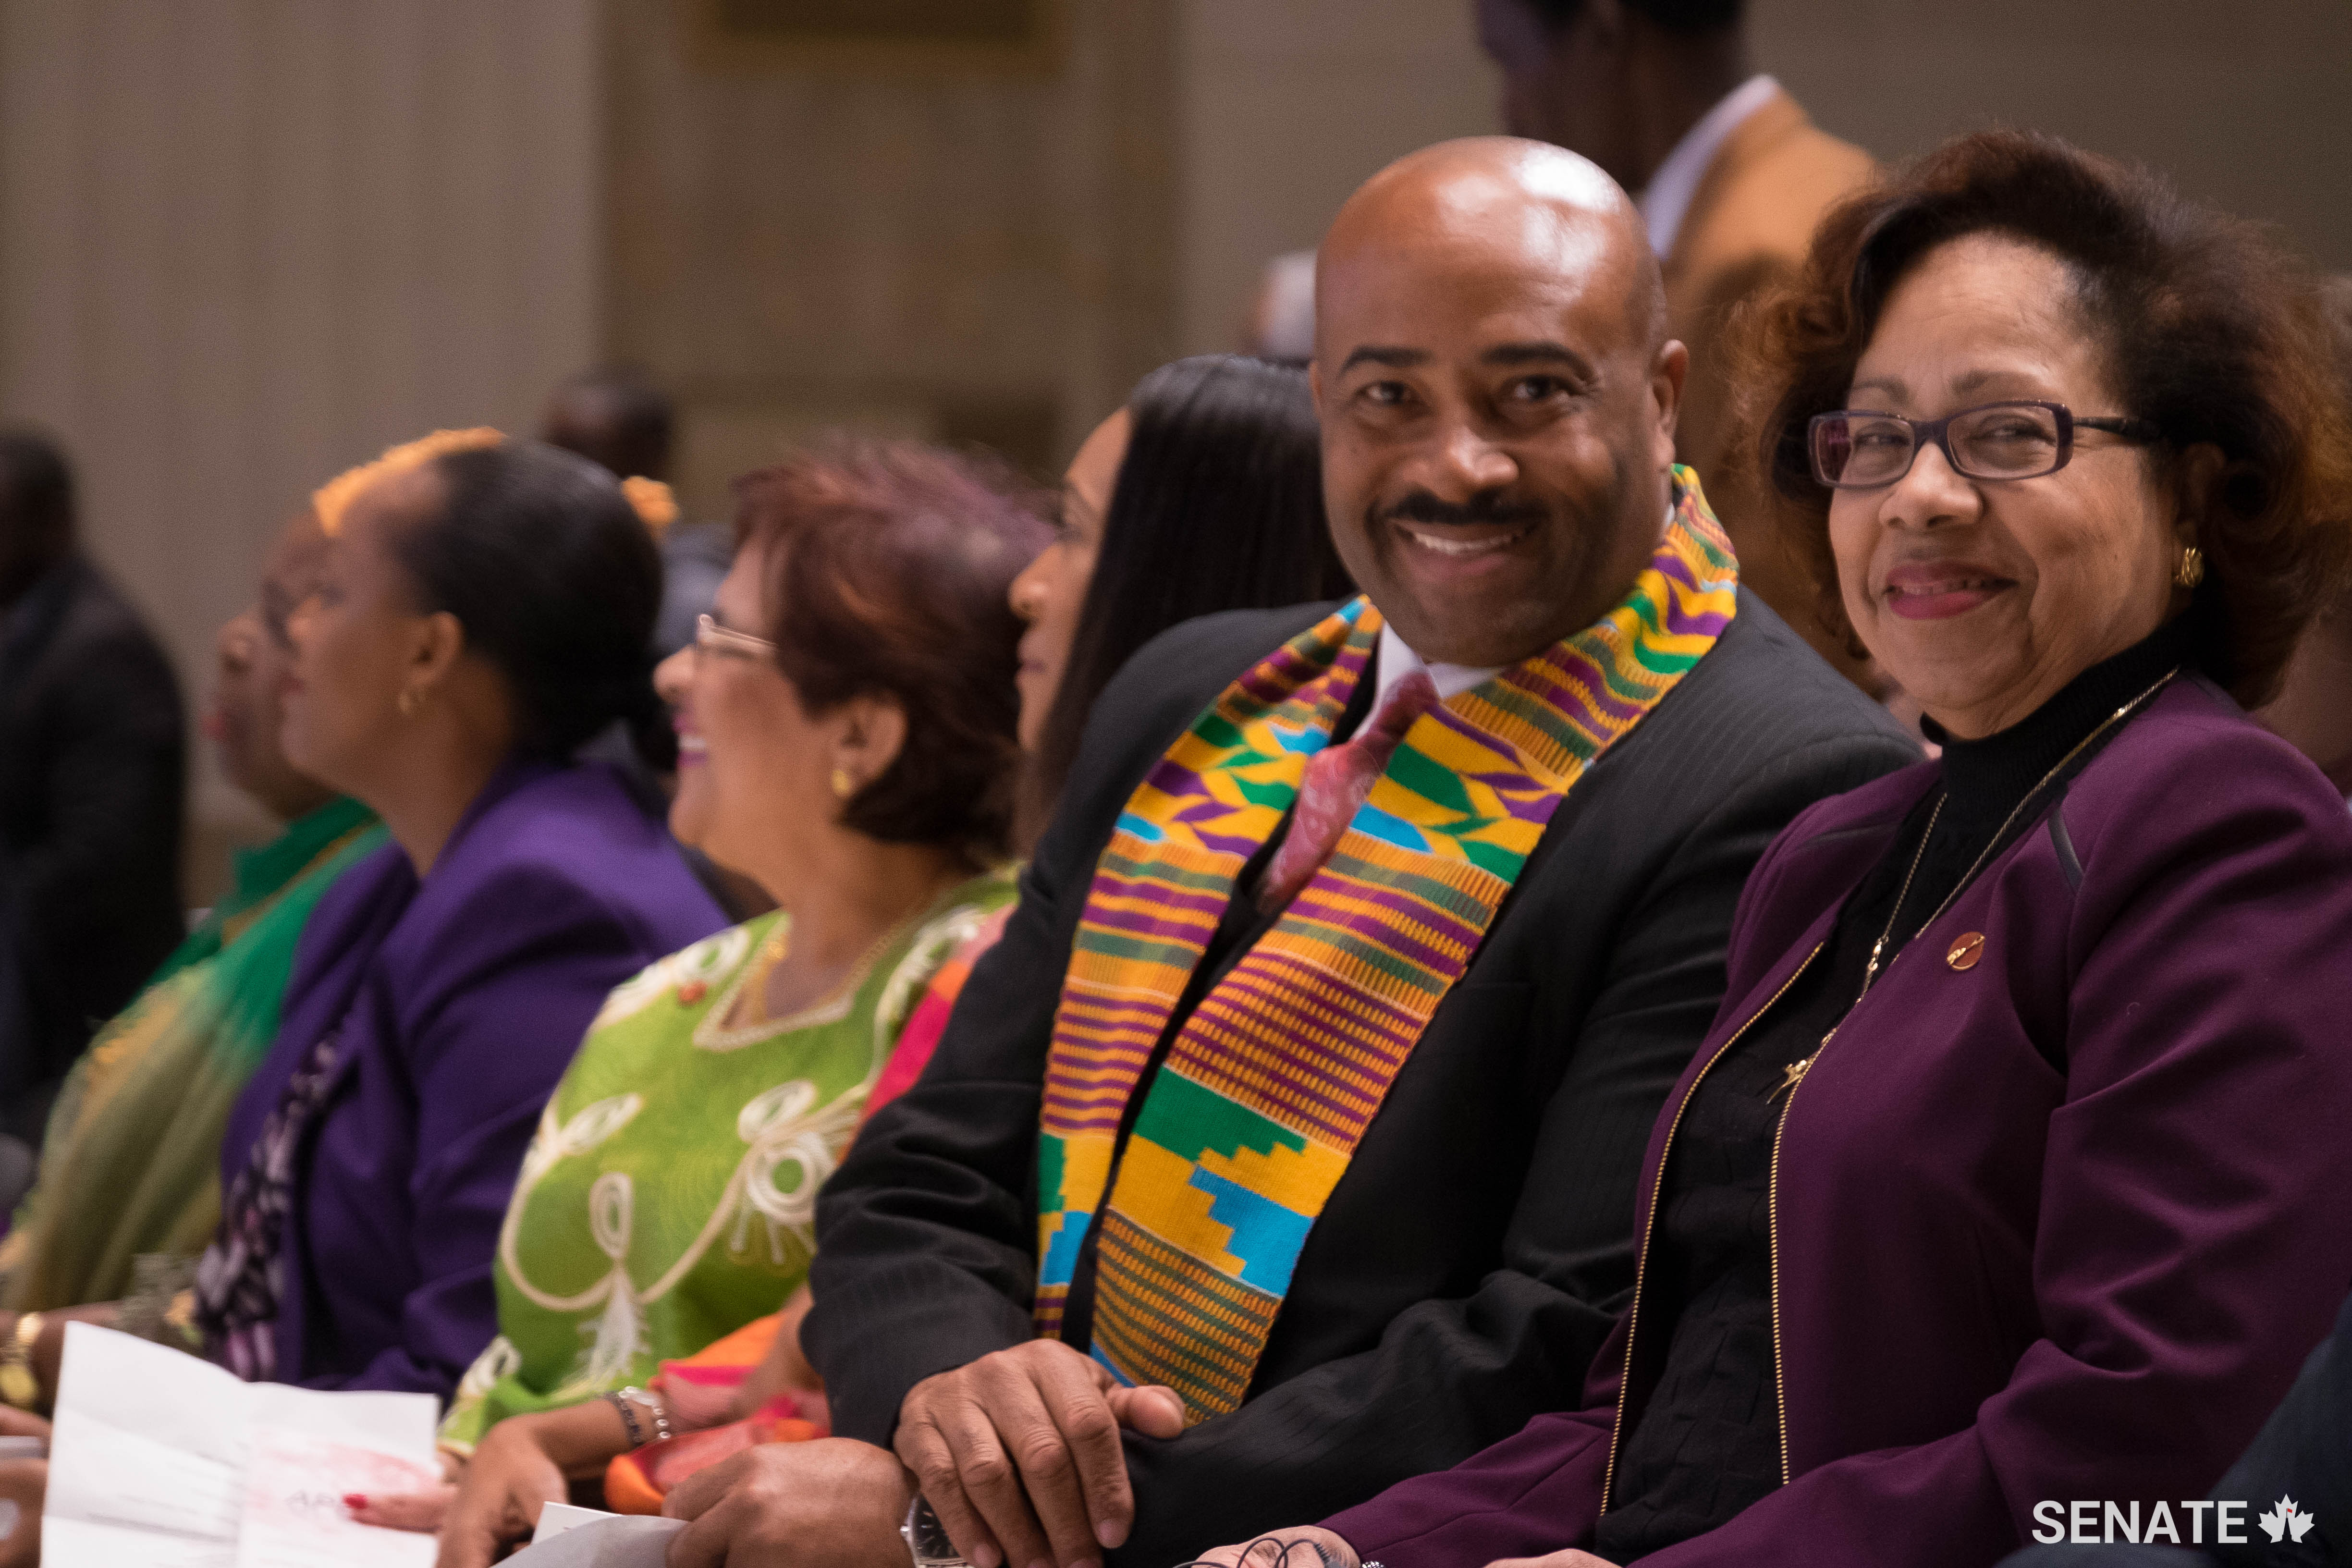 Senators Marie-Françoise Mégie and Don Meredith hosted a celebration of Black History Month in Ottawa, 2017. Seated to their right is event co-host Senator Mobina Jaffer.